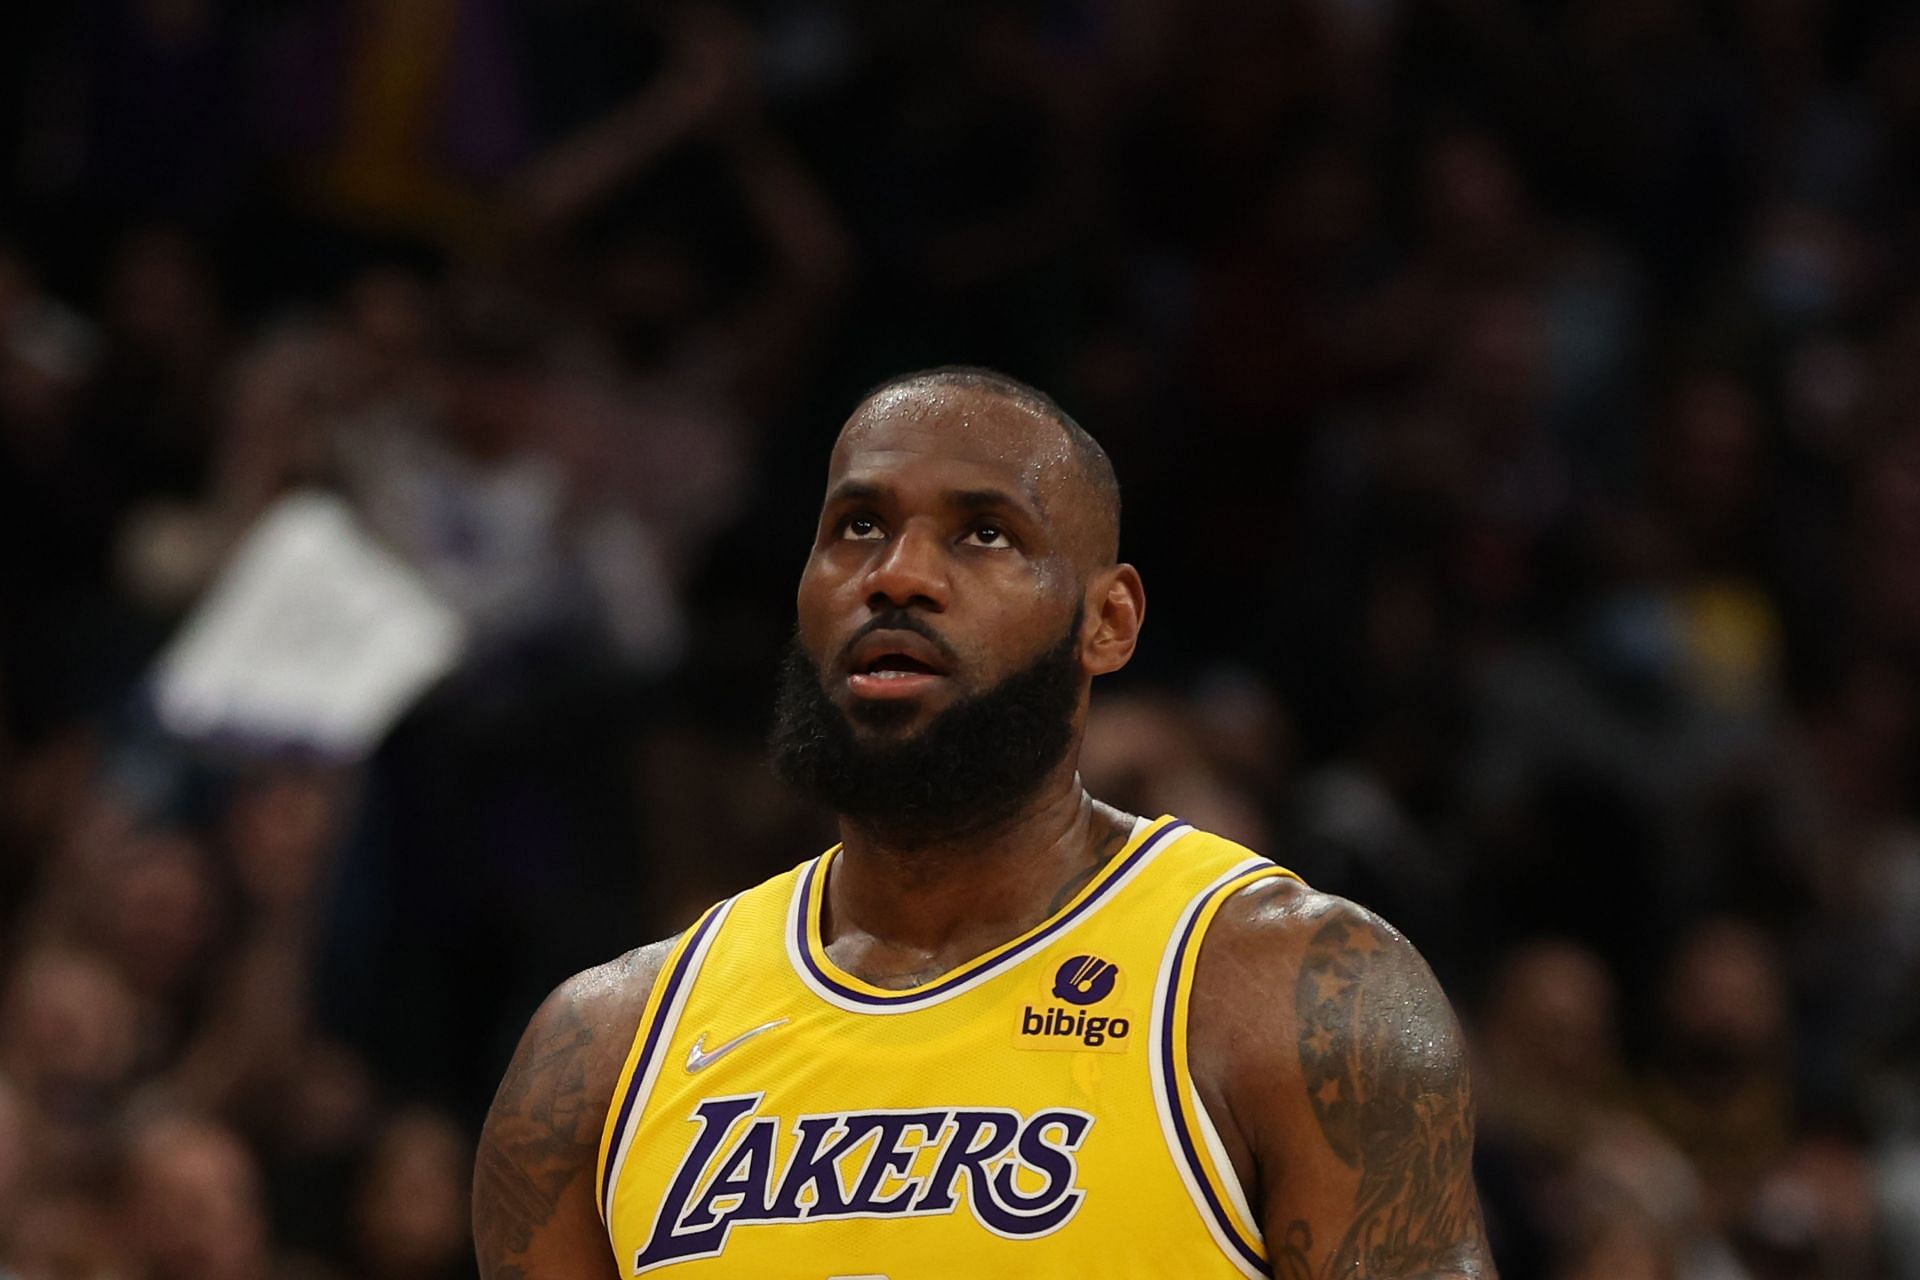 Los Angeles Lakers vs. Washington Wizards; LeBron James reacts after scoring.